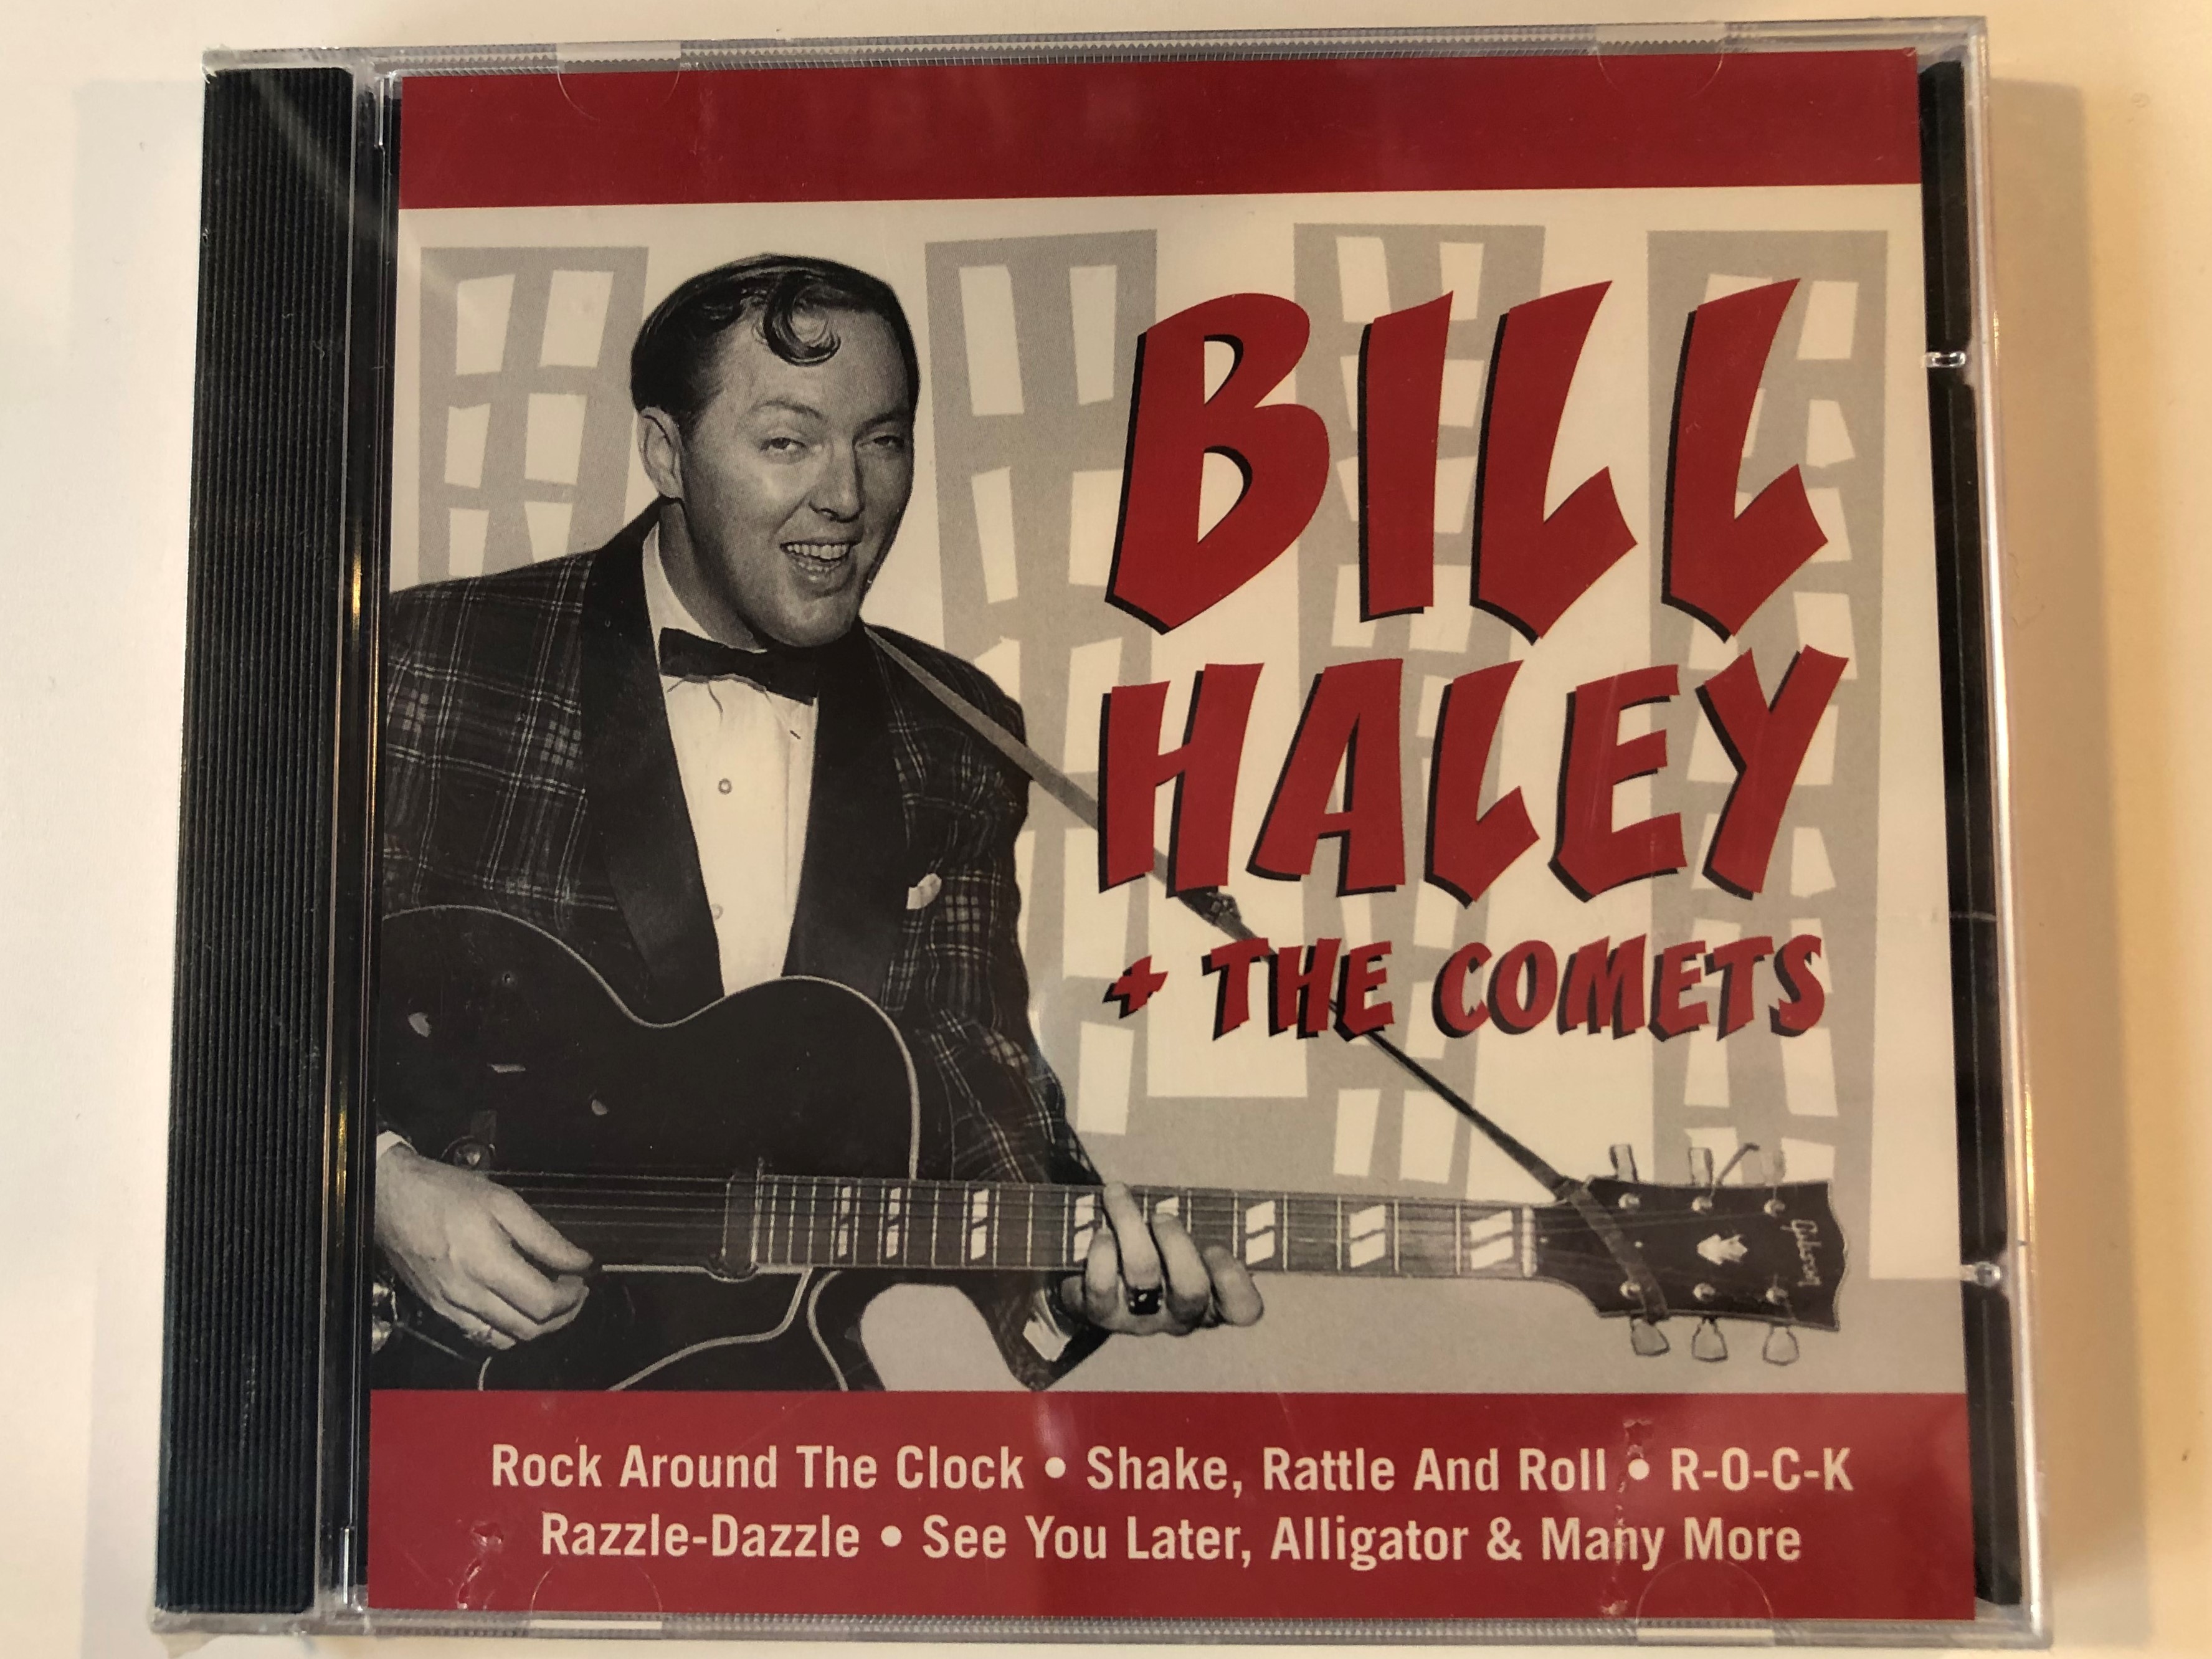 bill-haley-the-comets-rock-around-the-clock-shake-rattle-and-roll-r-o-c-k-razzle-dazzle-see-you-later-alligator-many-more-fox-music-audio-cd-fu-1041-1-.jpg